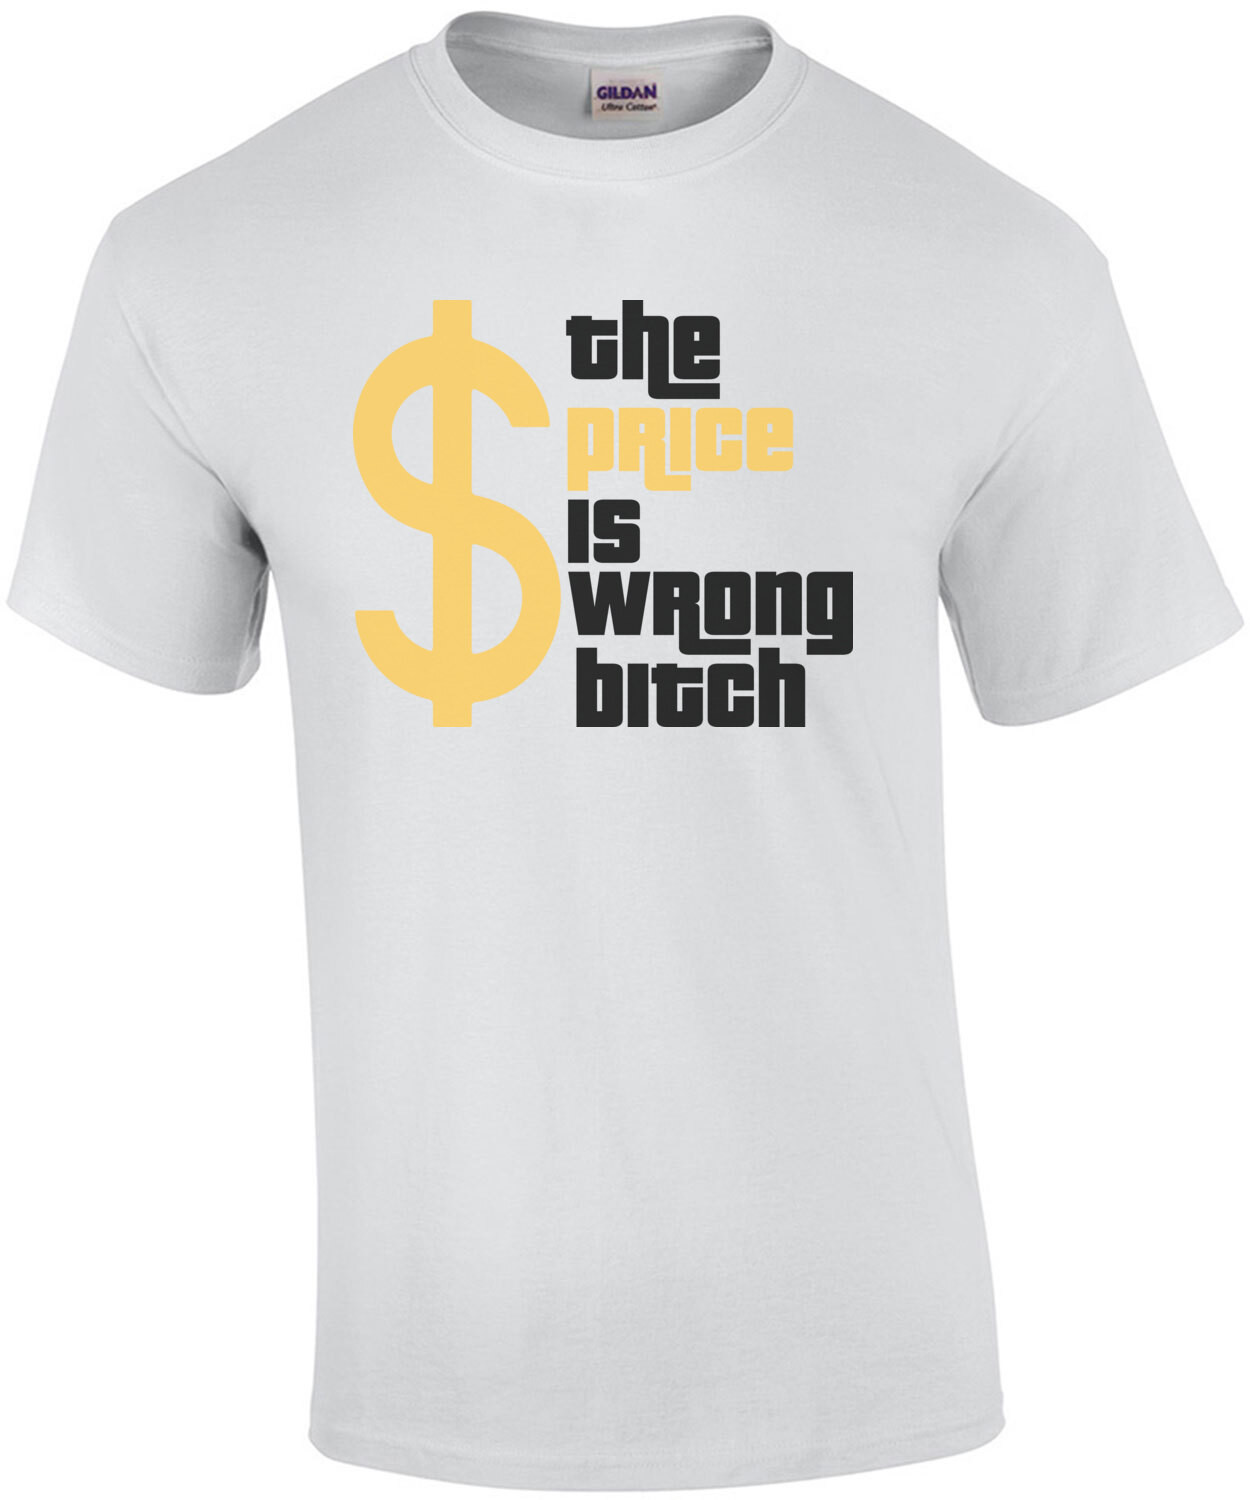 The Price is Wrong Bitch - Funny Price Is Right Parody T-Shirt